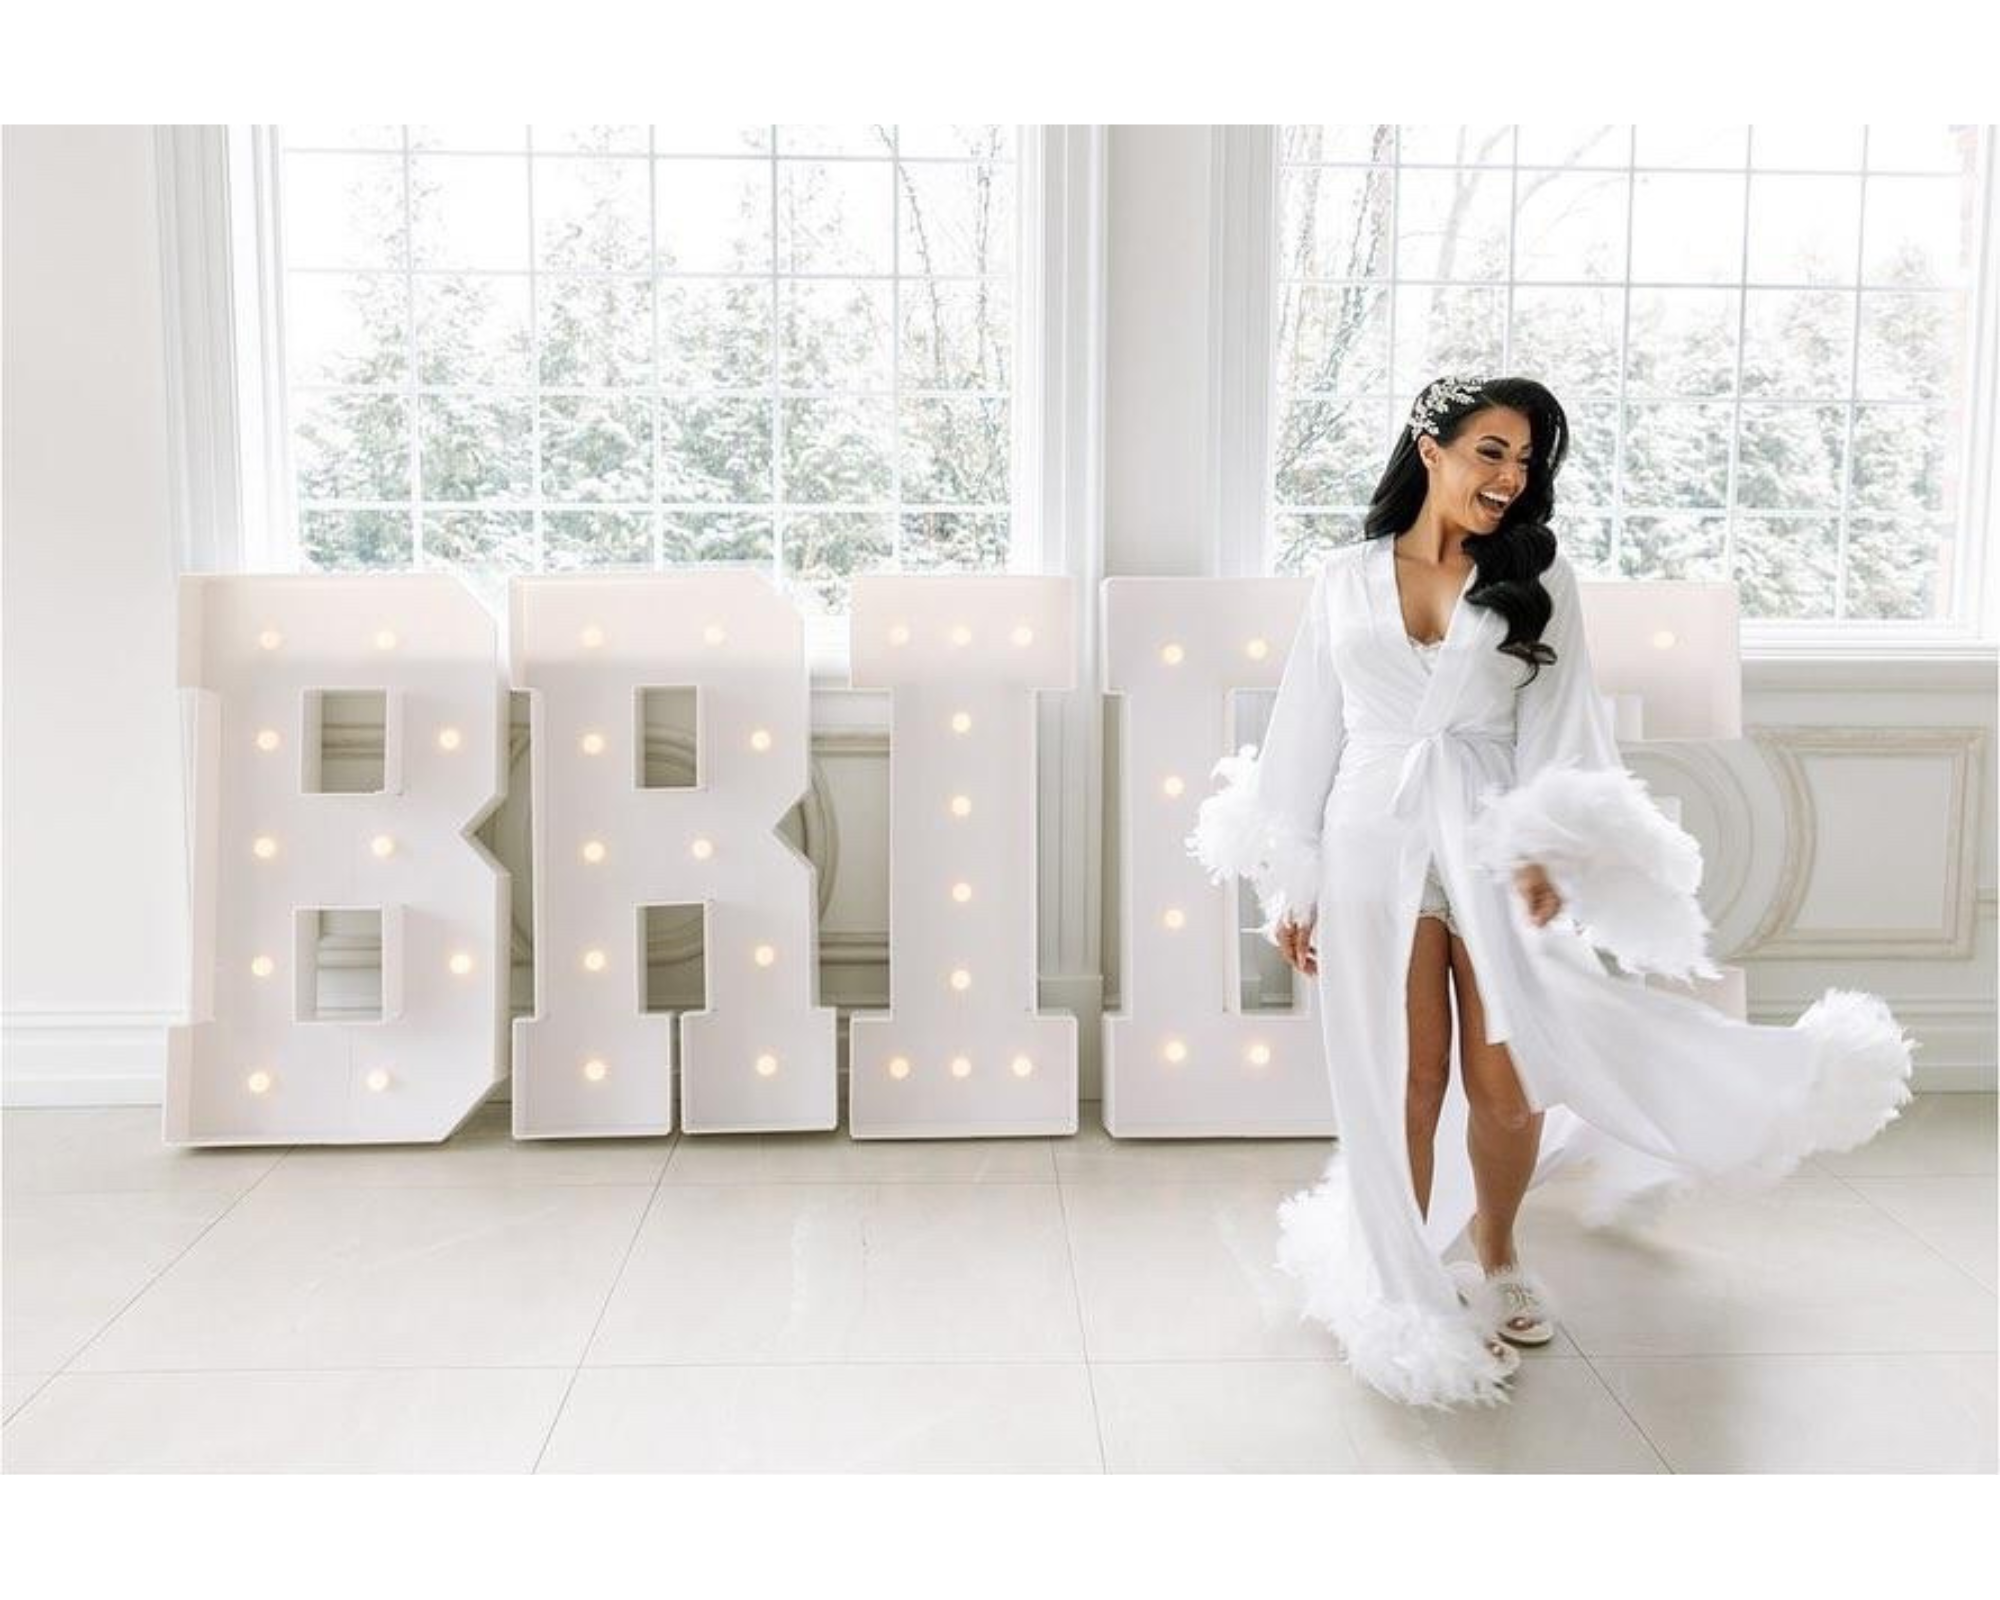 Our beautiful bride dances in front of a giant lit-up sign reading, 'bride.' She's wearing a white robe and her Swarovski crystal hair vine.